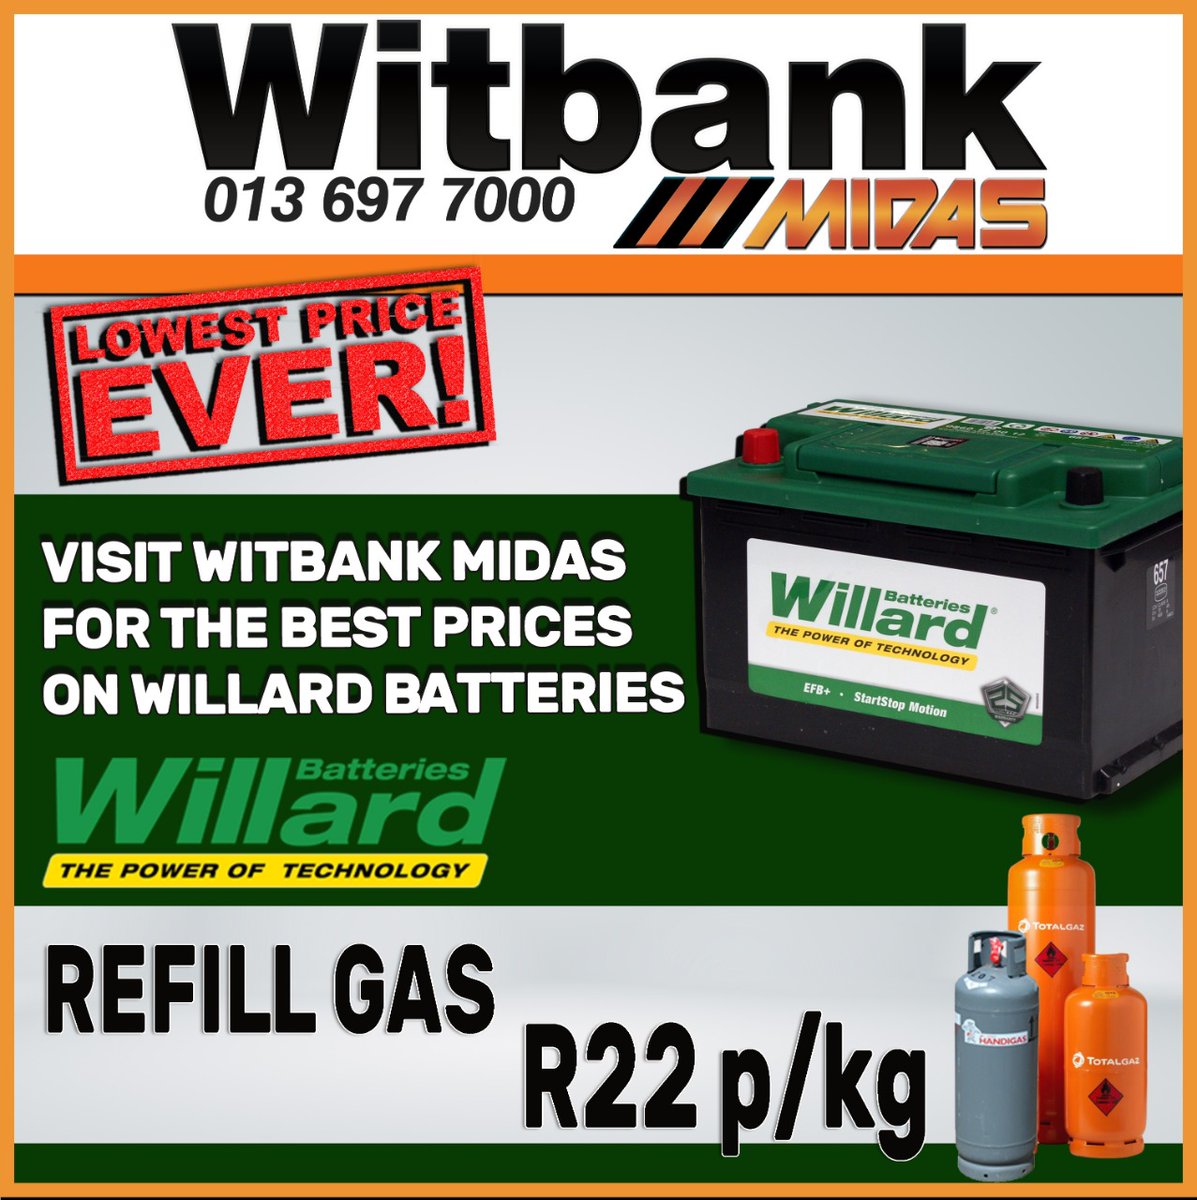 Get the Lowest Prices on Willard Batteries at Midas Witbank!
Refill Gas ONLY R22p/kg!
Limited Time Offer!
#automotive #lowestprice #WillardBatteries #midaswitbank #gasrefill #automotiveindustry #automotivebatteries #witbank